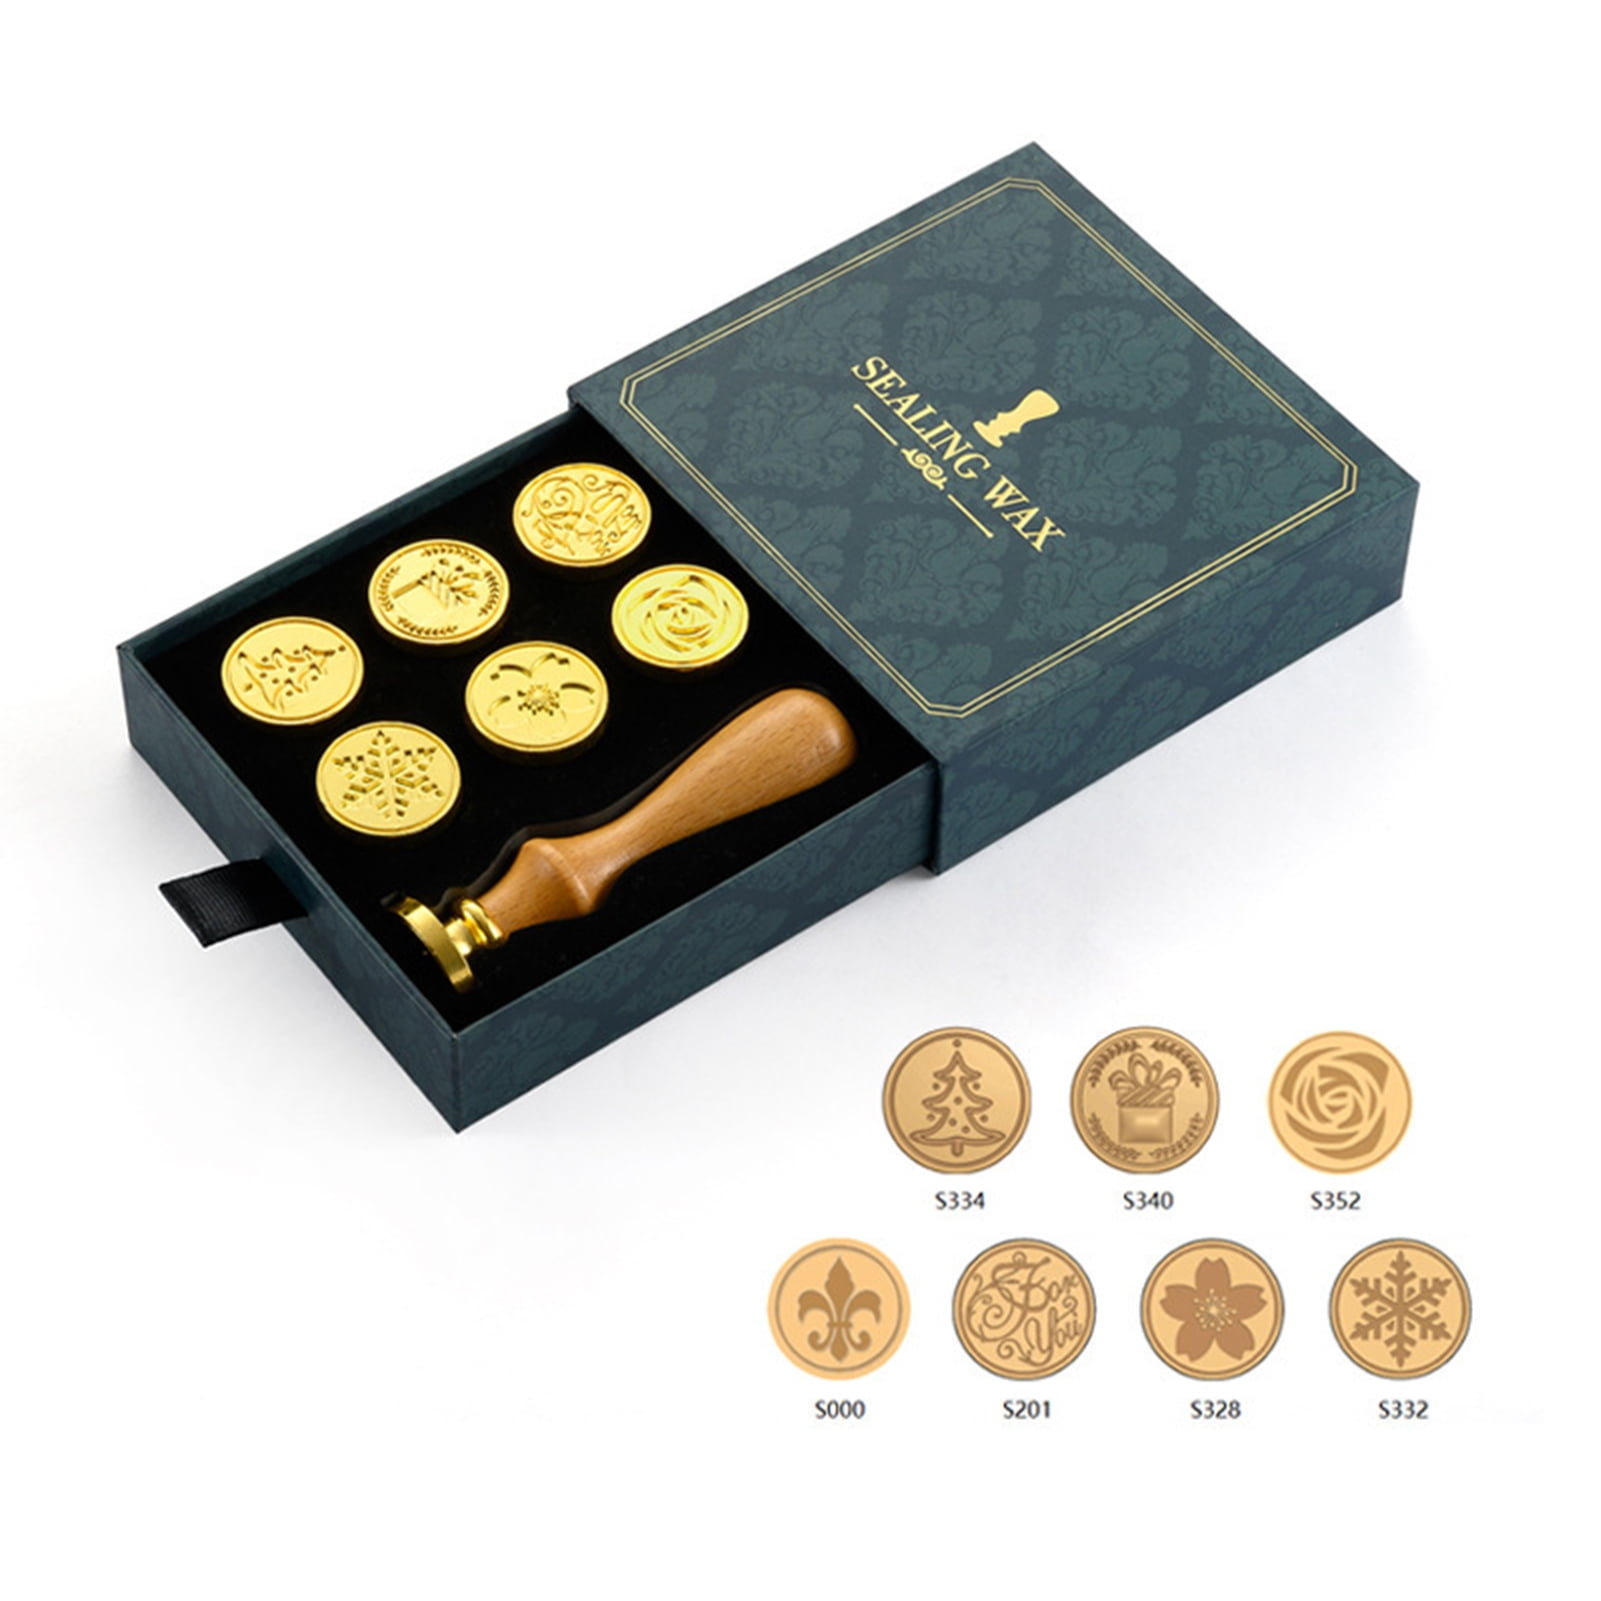 Wax Seal Stamp Kit, Retro Creative Sealing Wax Stamp Maker Gift Box Set  Head with Vintage Classic,G21434